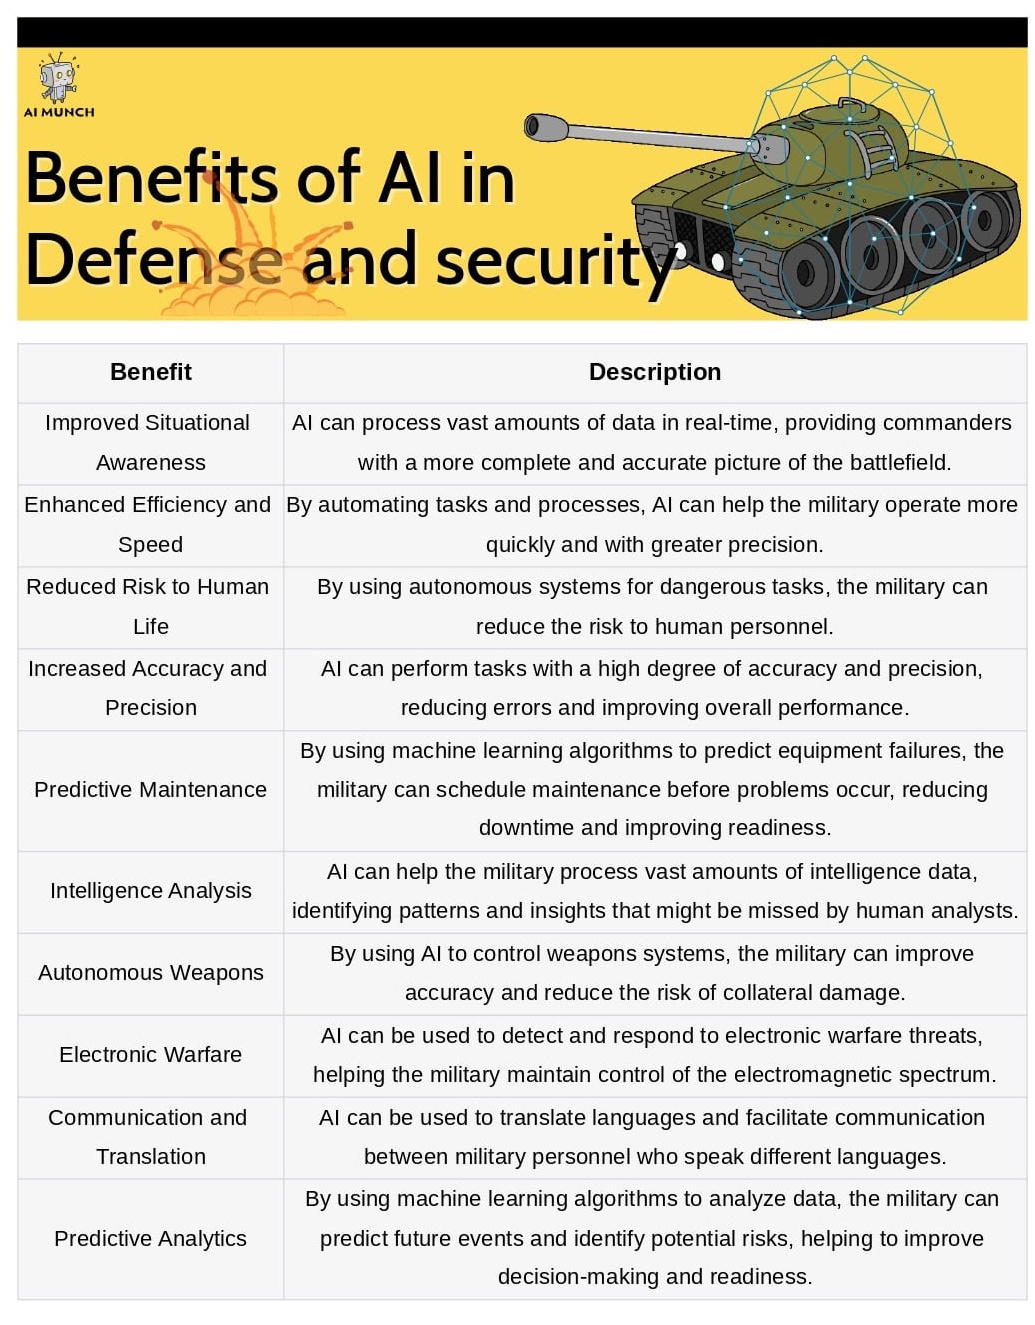 benefits of using artificial intelligence (AI) in defense and security 